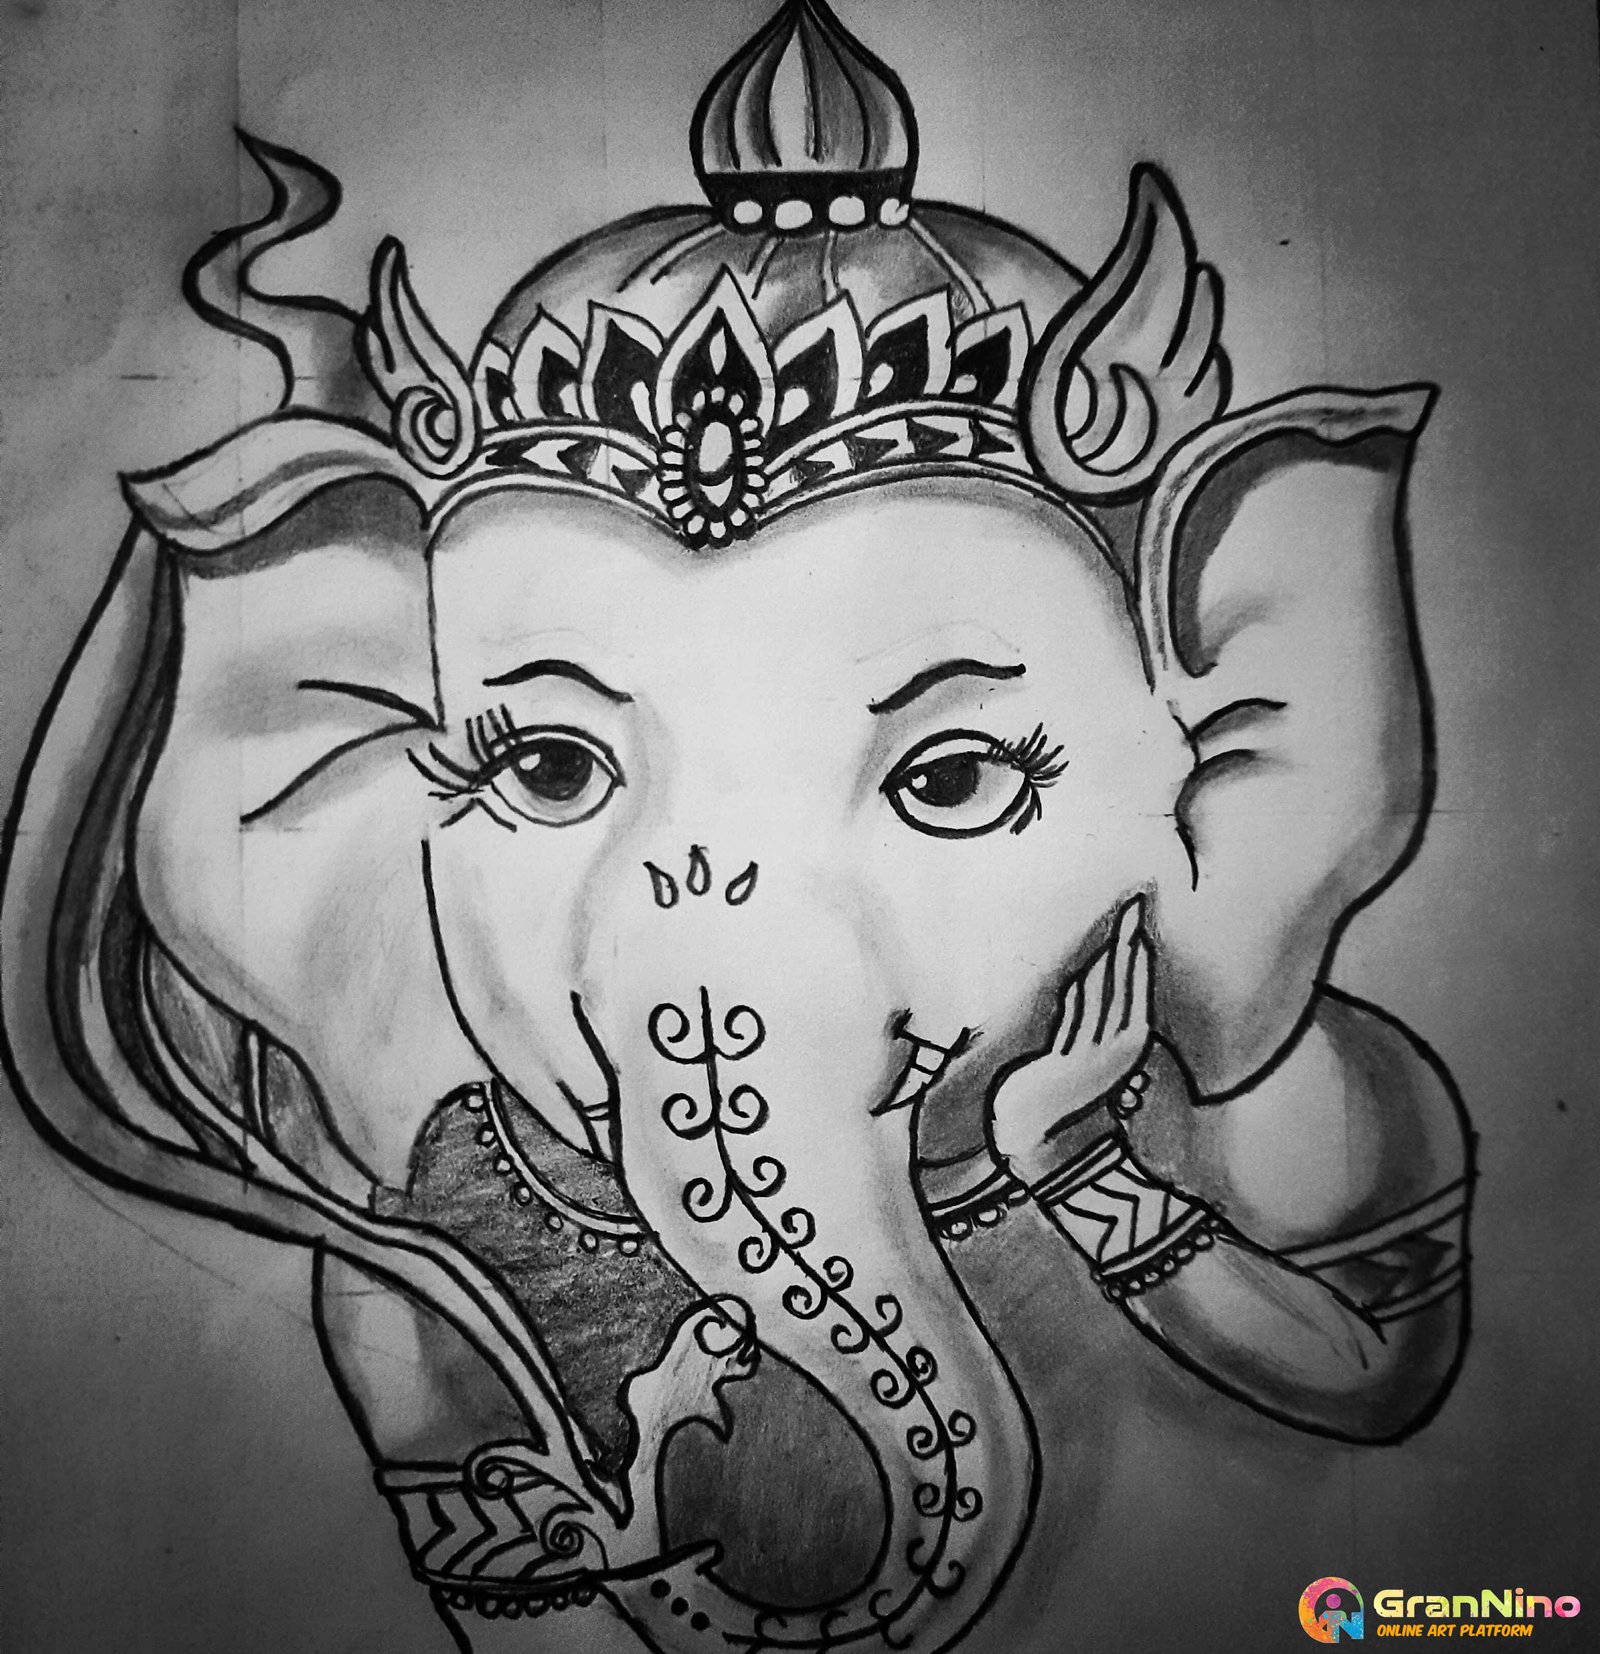 Y S YOUR SHOP YOUR DESIRE Ganesh Ji Pencil 13.38 inch x 10.62 inch Painting  Price in India - Buy Y S YOUR SHOP YOUR DESIRE Ganesh Ji Pencil 13.38 inch x